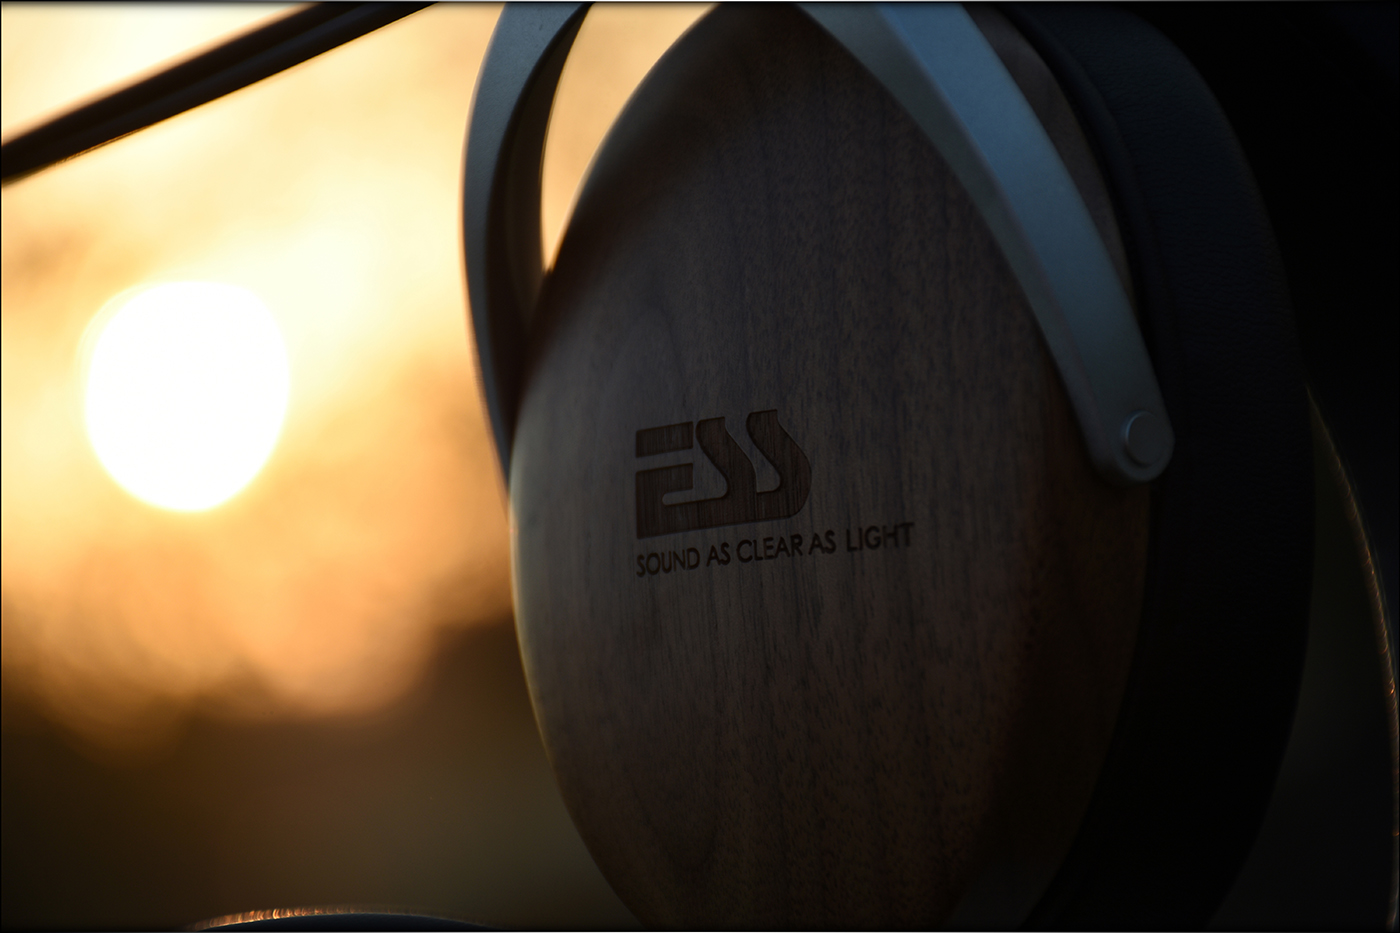 ESS-422H-Headphones-Over-The-Ear-Review-Audiophile-Heaven-Photo-38.jpg